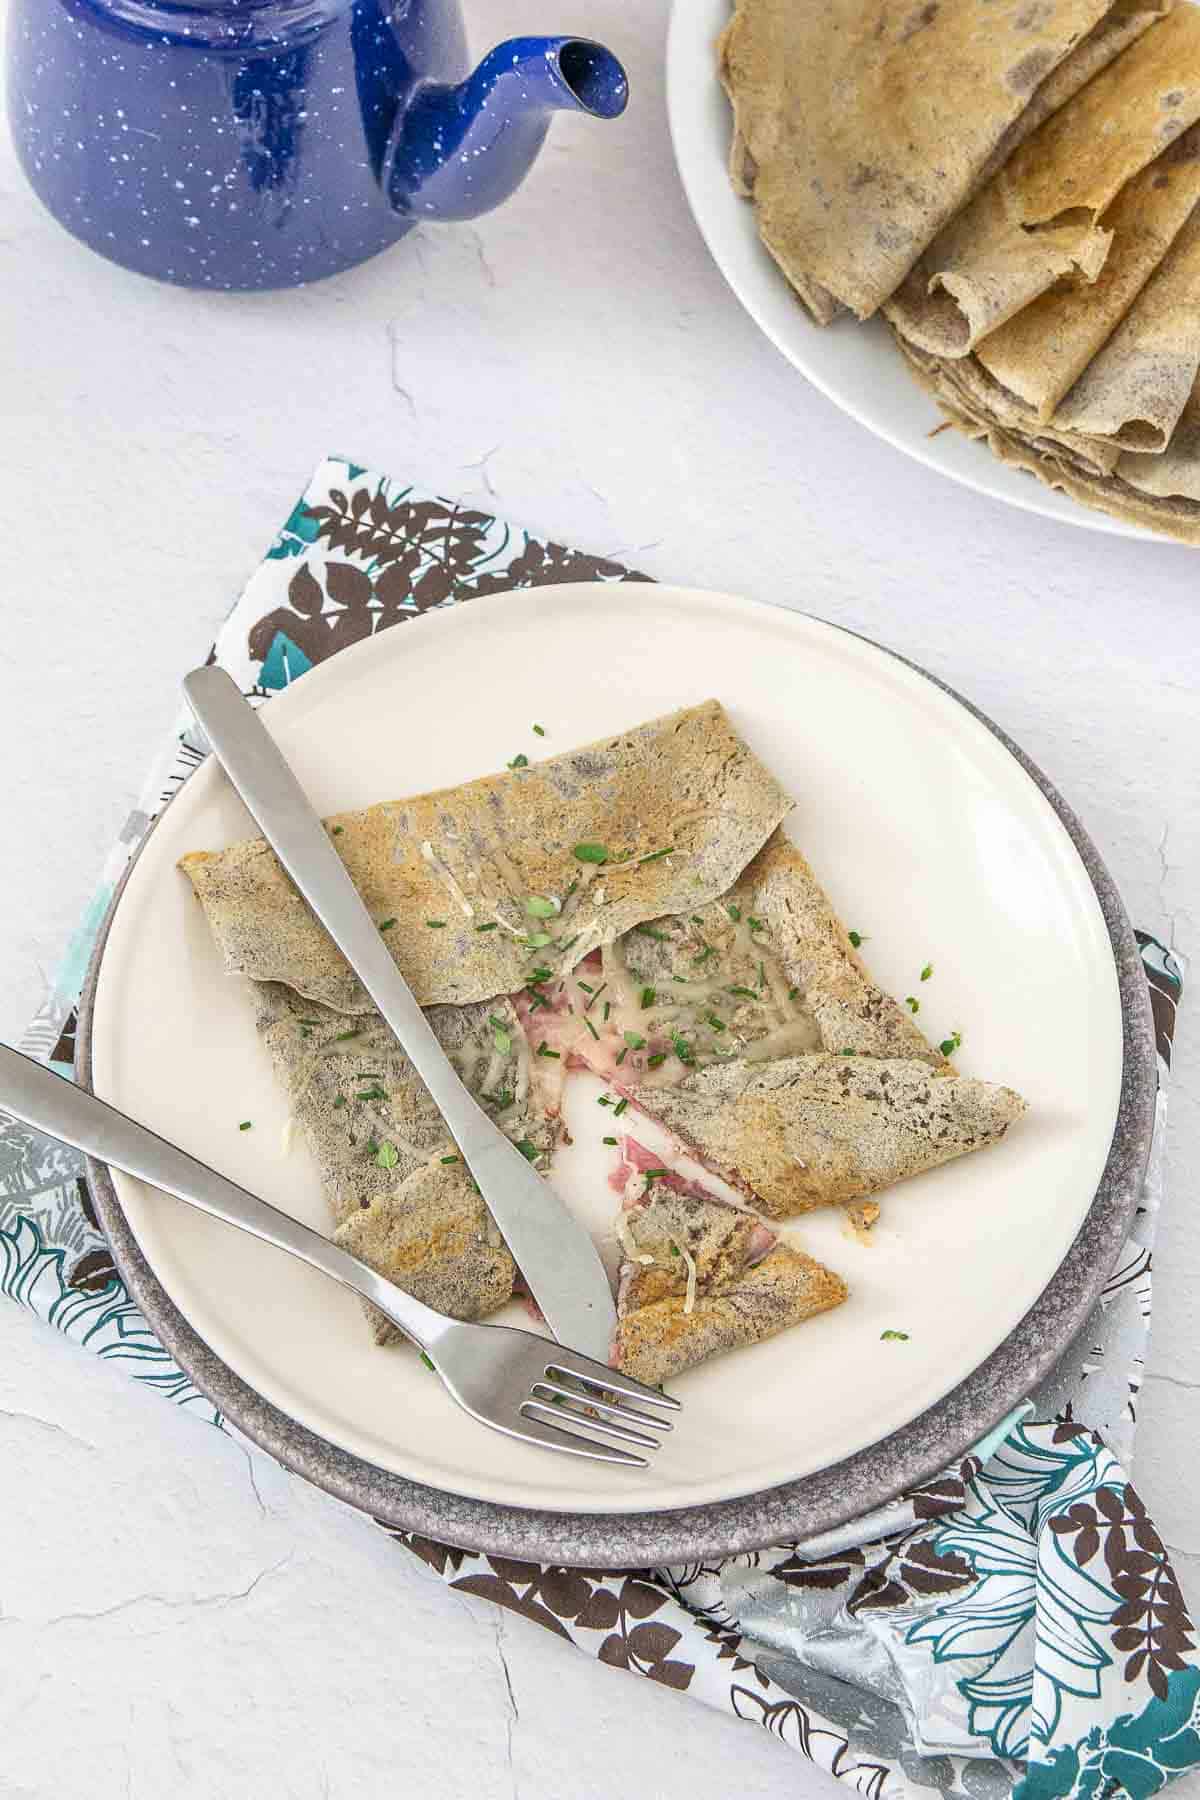 Gluten free crepe with ham and cheese on a plate, cut open with knife and fork.